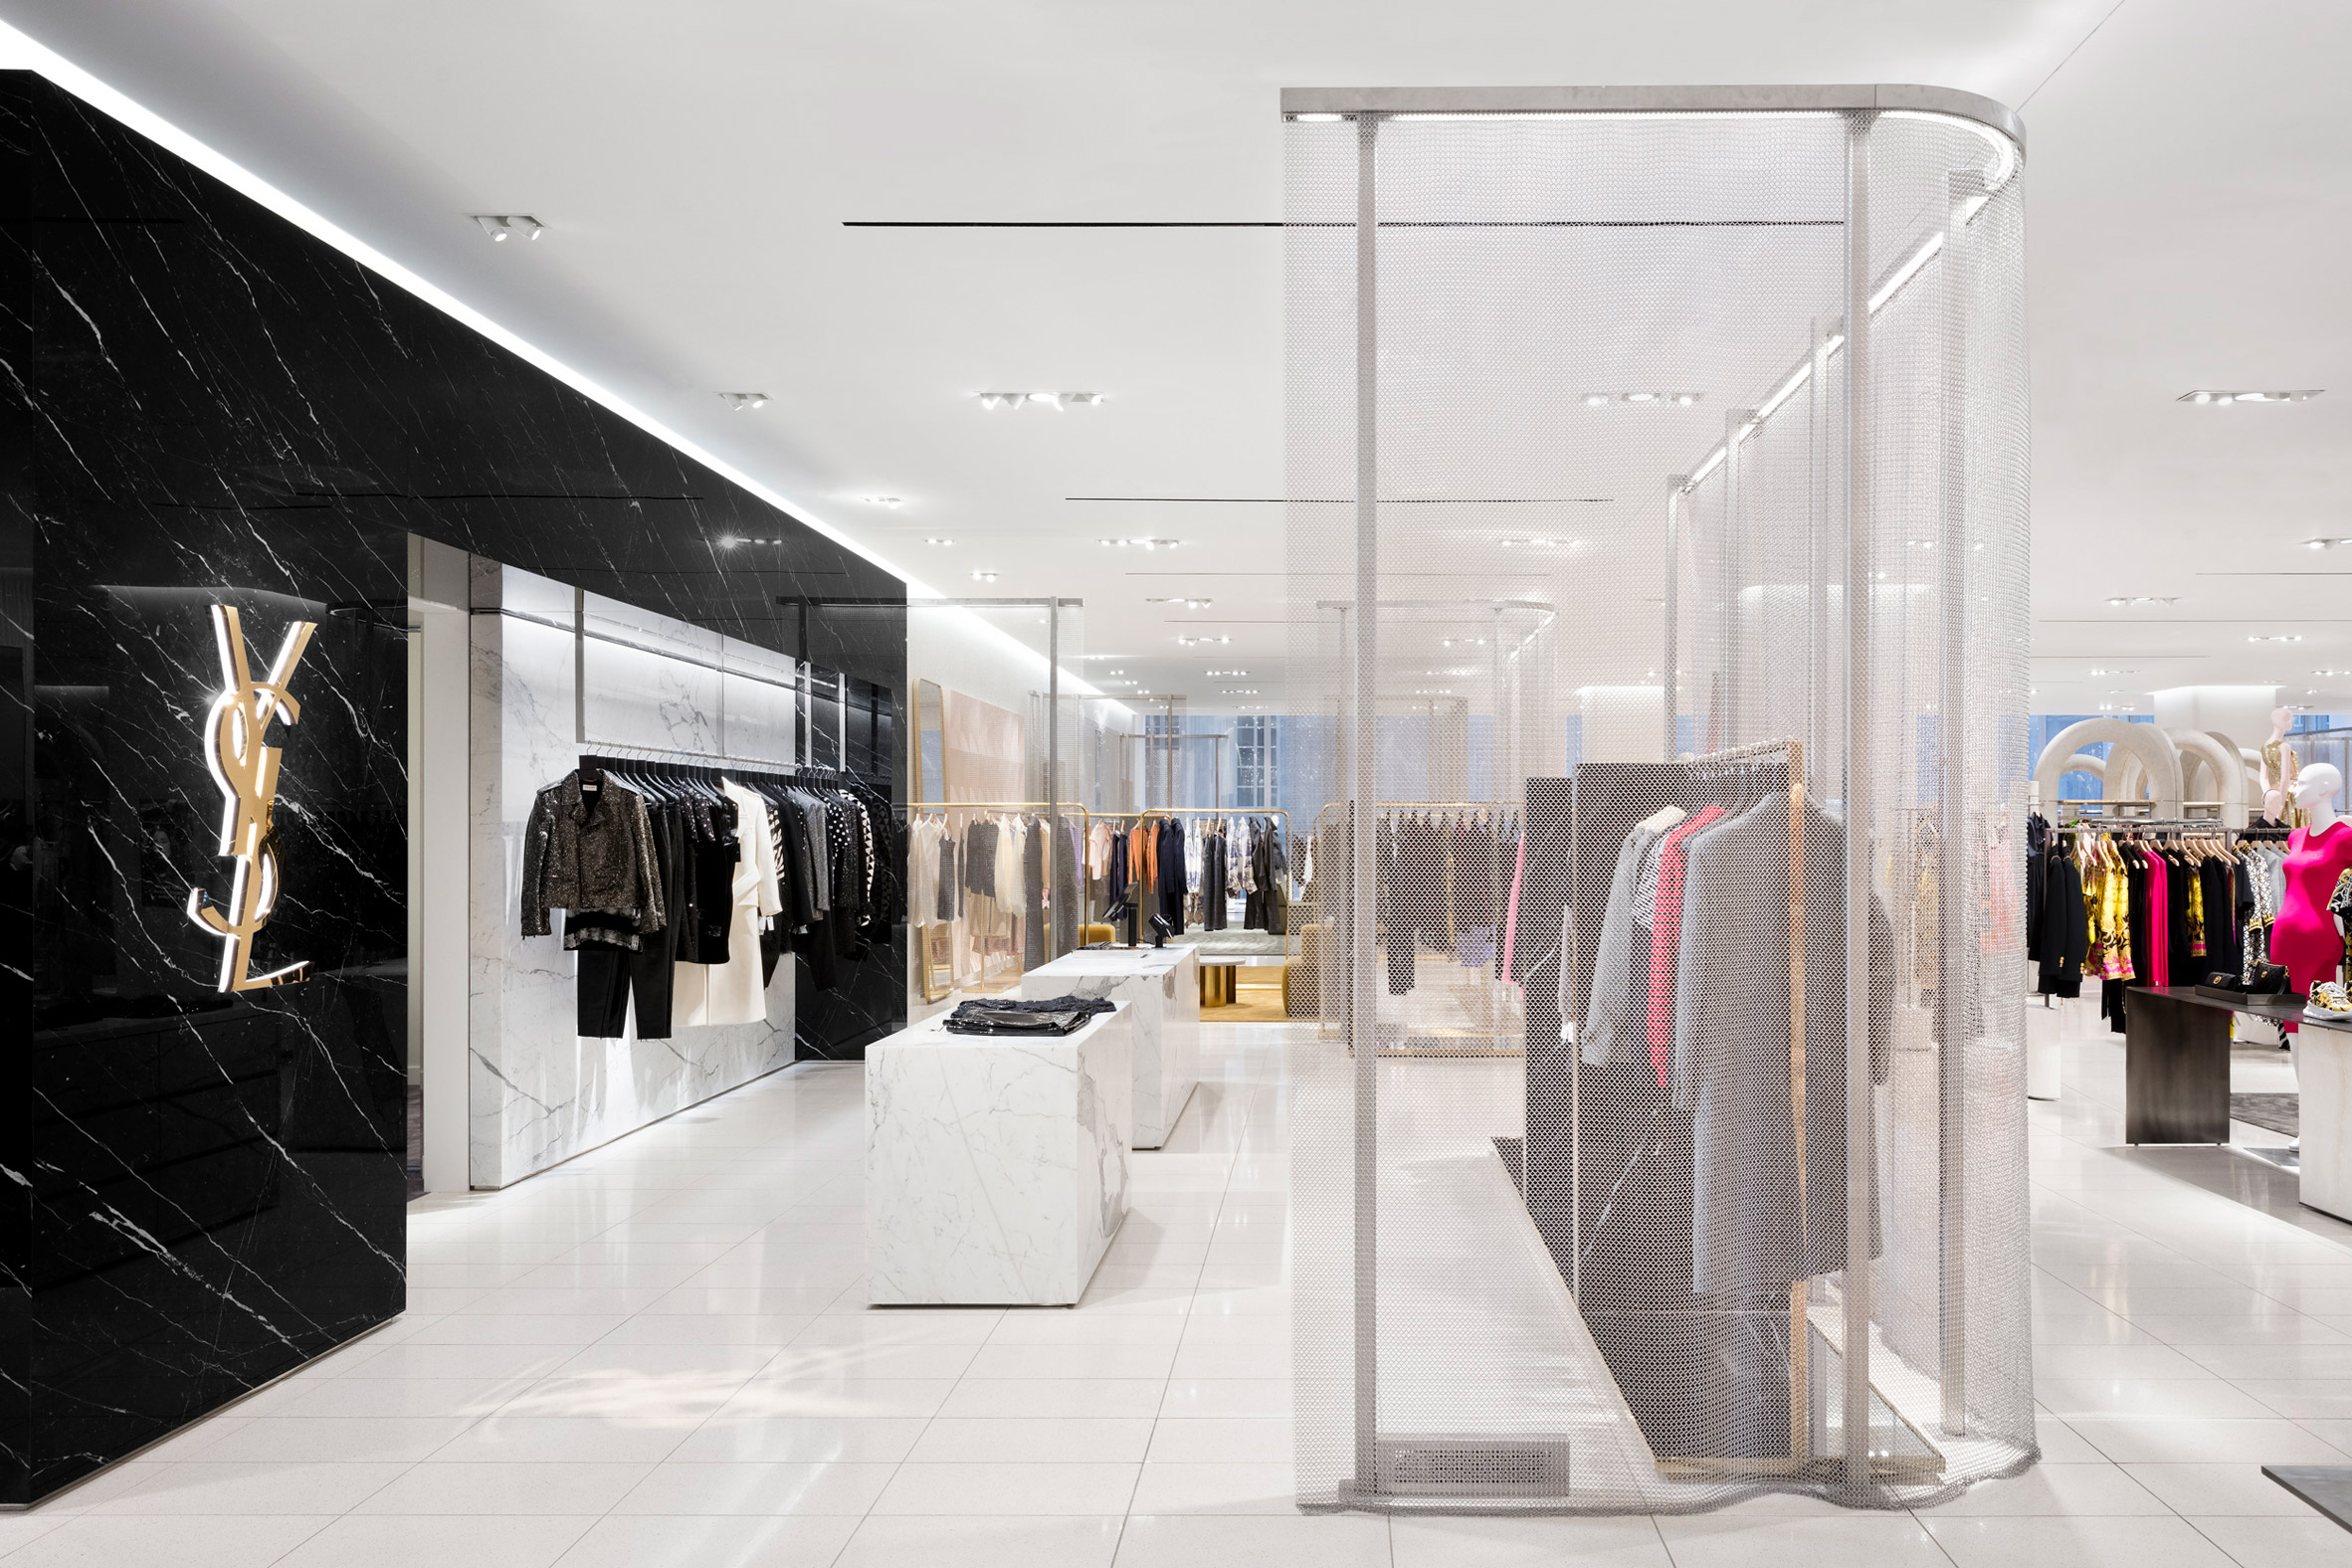 Nordstrom's New York flagship opens. Here's a look inside